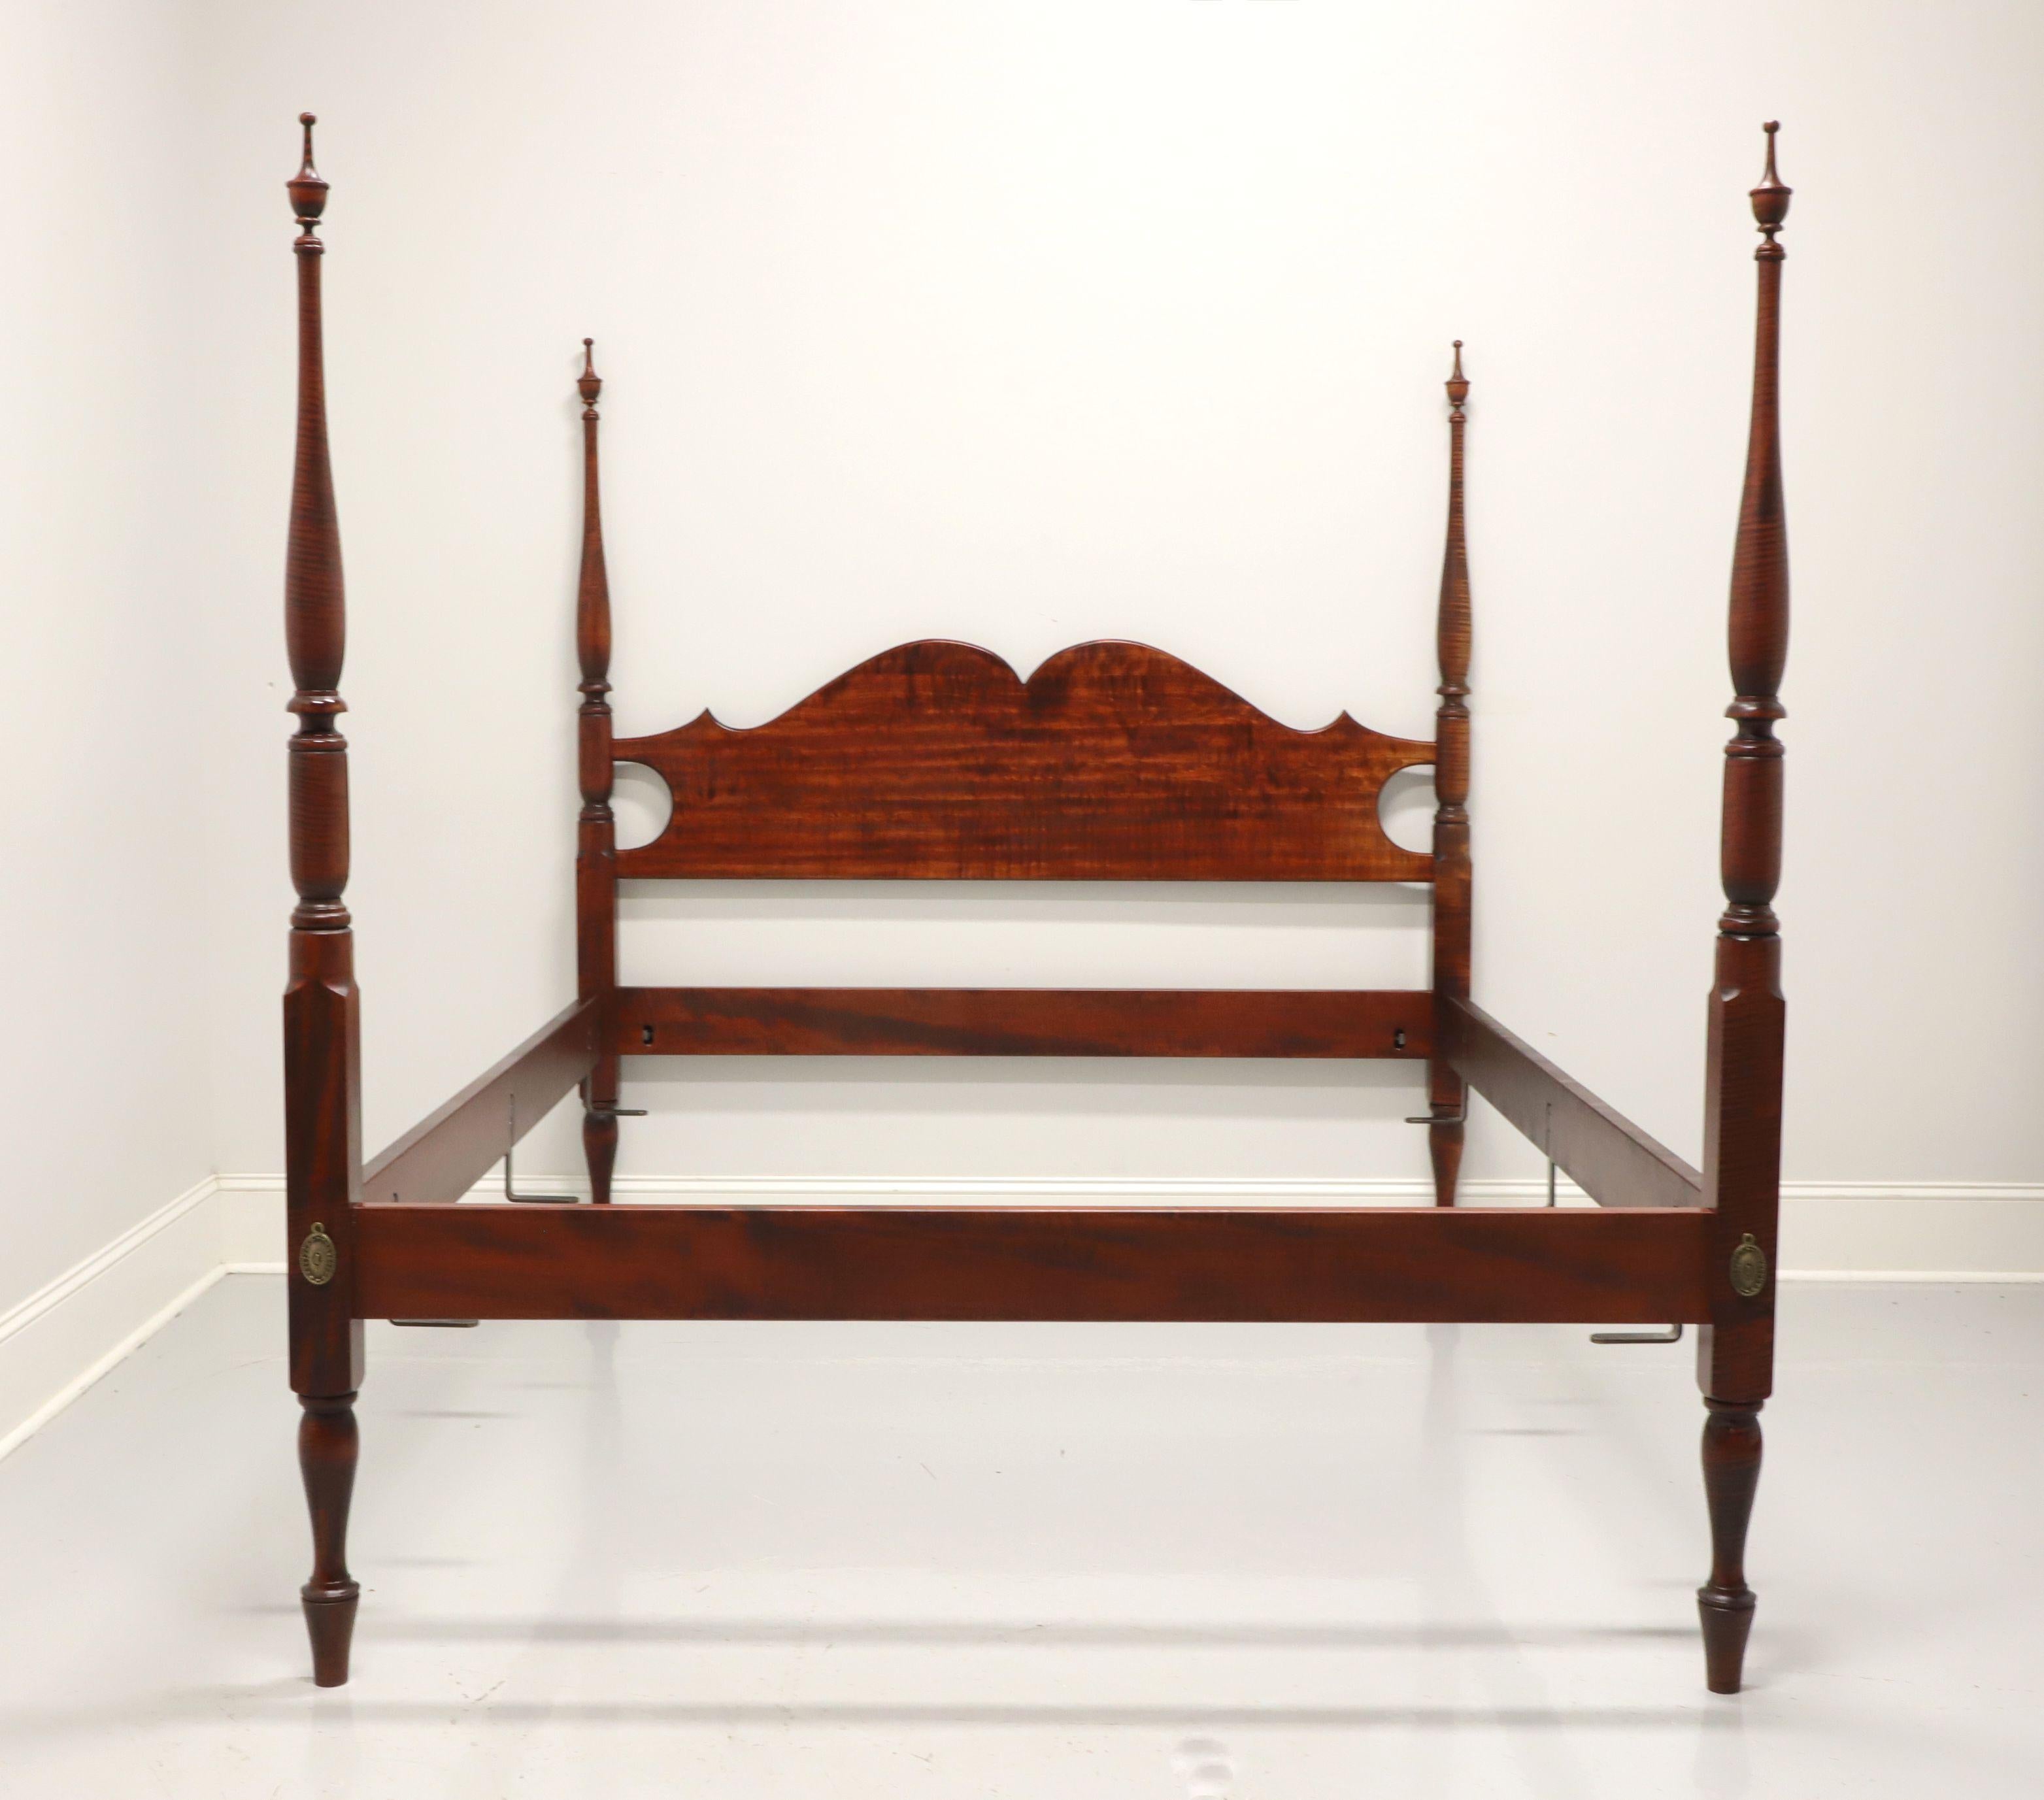 A Sheraton style queen size poster bed by JL Treharn. Solid tiger maple, four turned posts with finials, carved headboard, low footboard to match side rails, turned feet, brass covers to headboard and footboard. Metal mattress supports are mounted